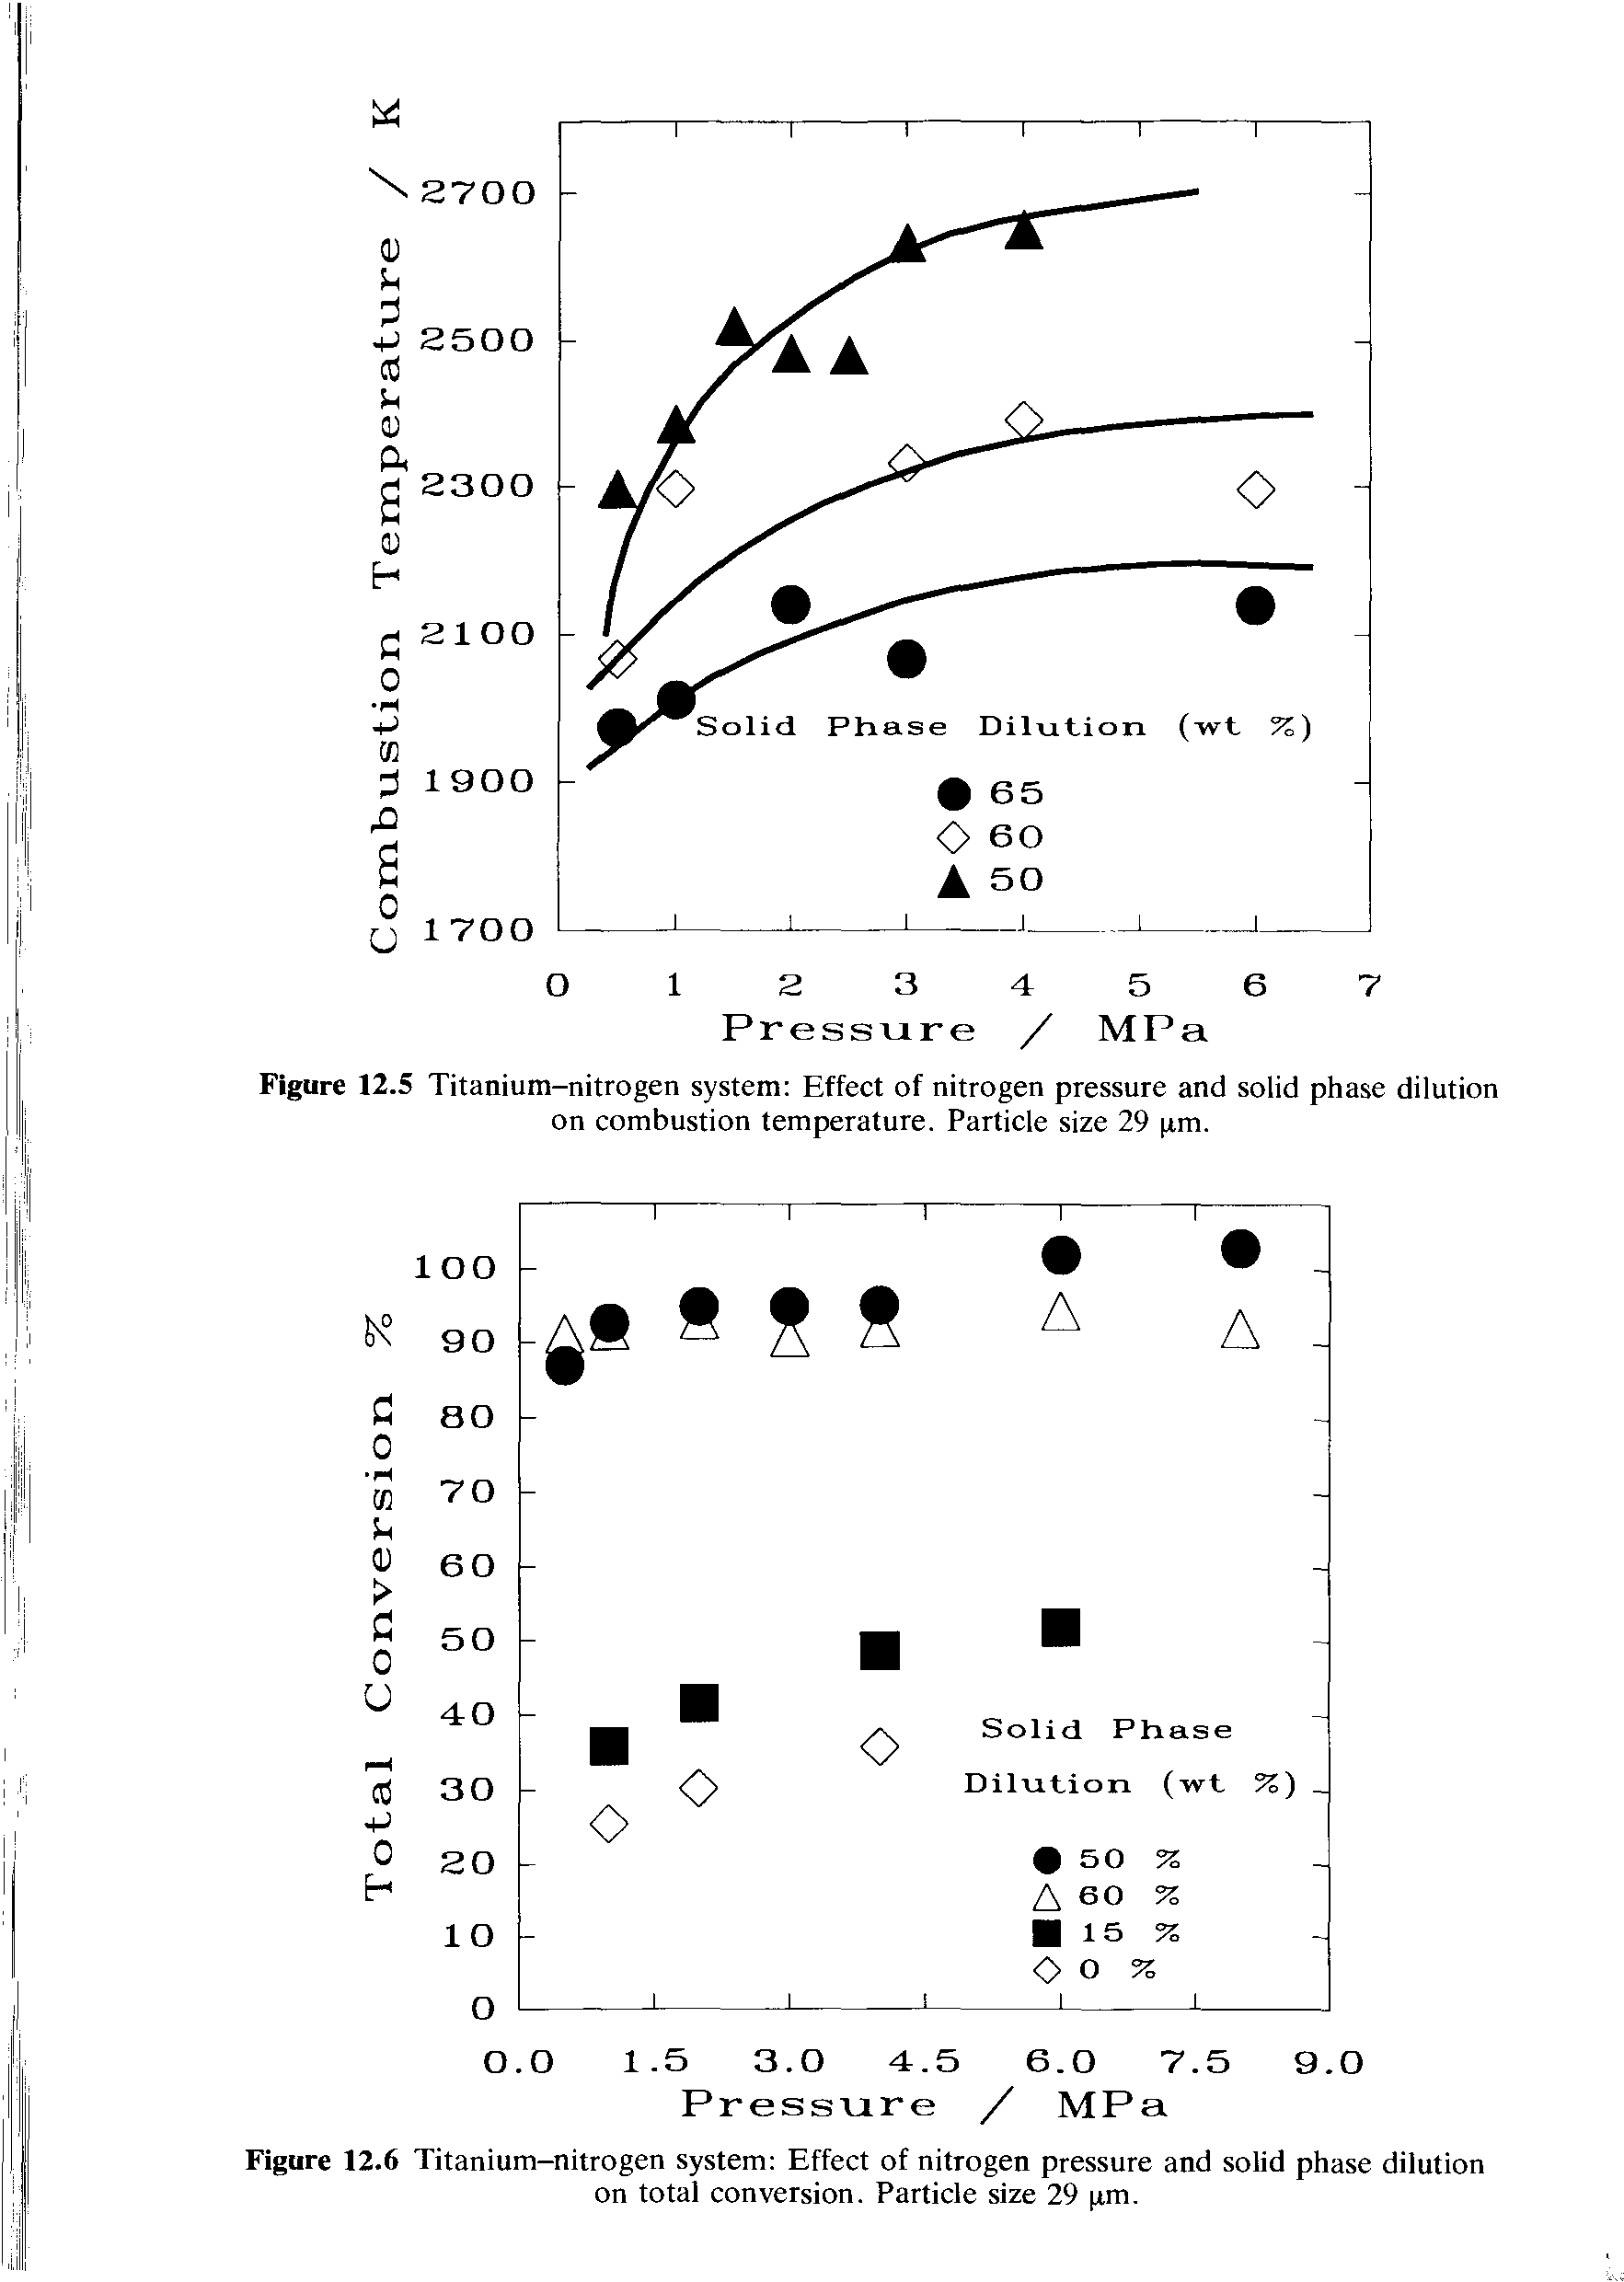 Figure 12.5 Titanium-nitrogen system Effect of nitrogen pressure and solid phase dilution on combustion temperature. Particle size 29 (rm.